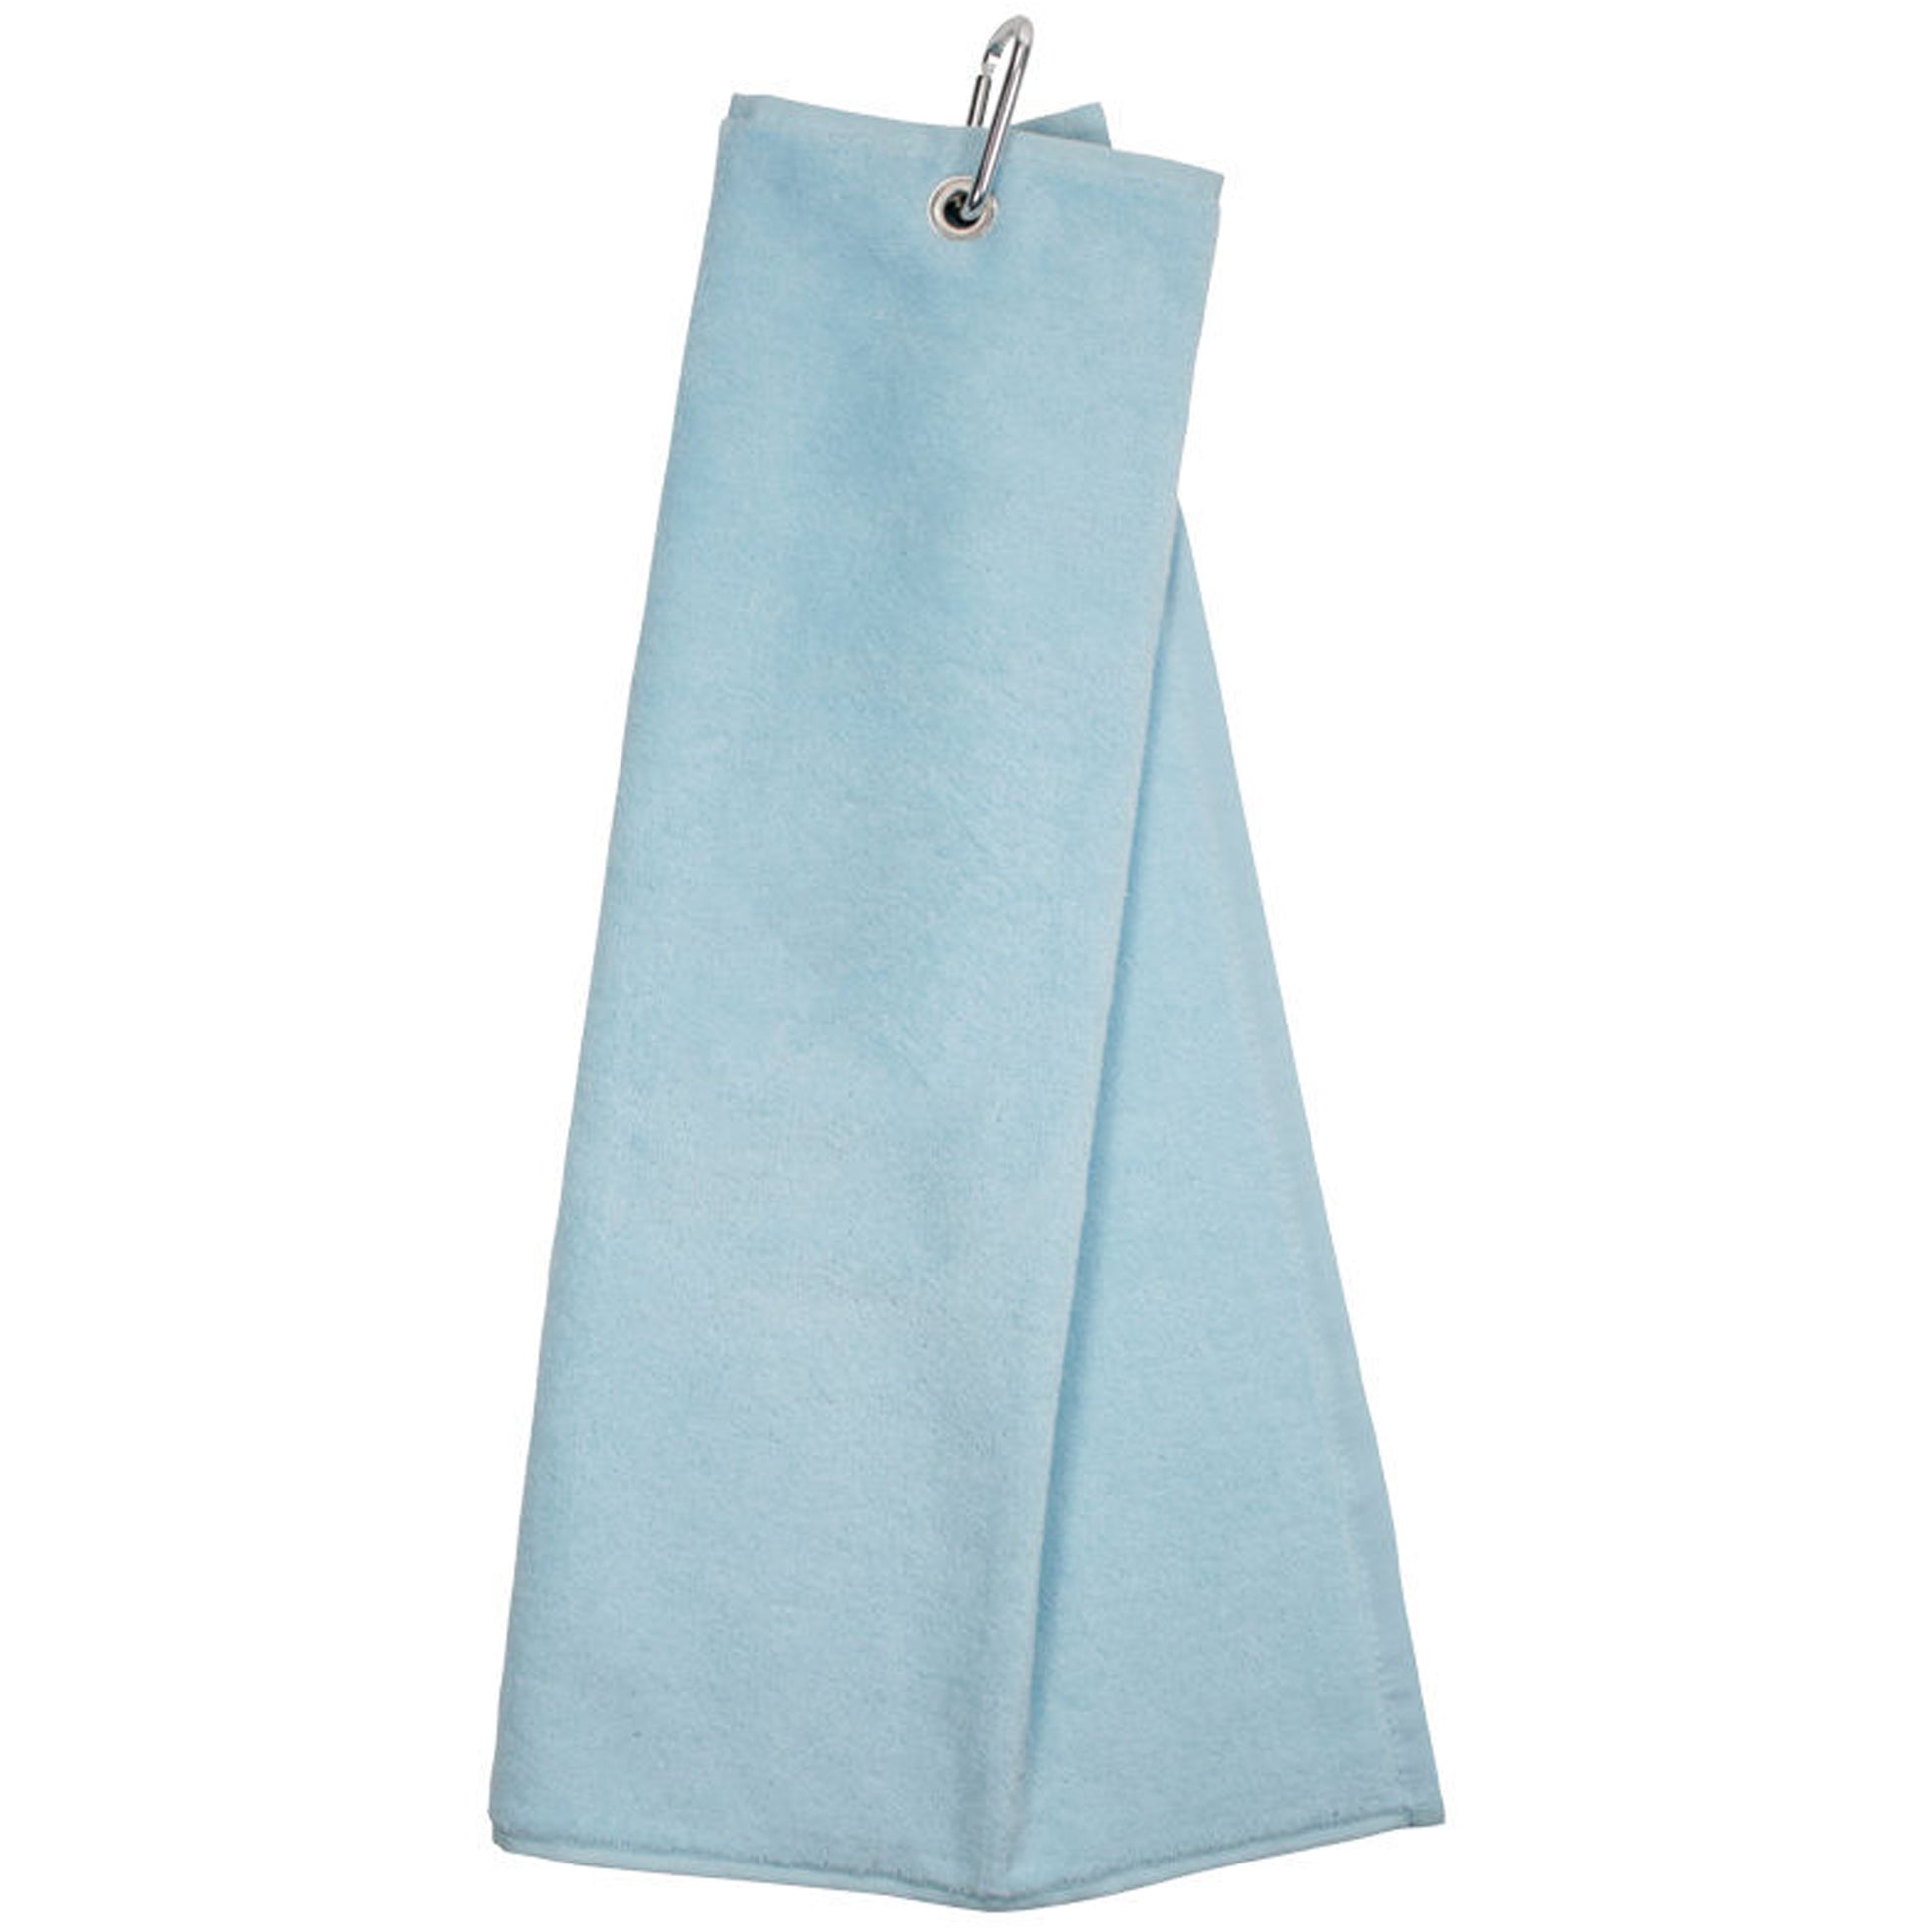 Personalised Embroidered Tri Fold TENNIS Towel Trifold with Carabiner Clip  - Always Looking Good - Light Blue  